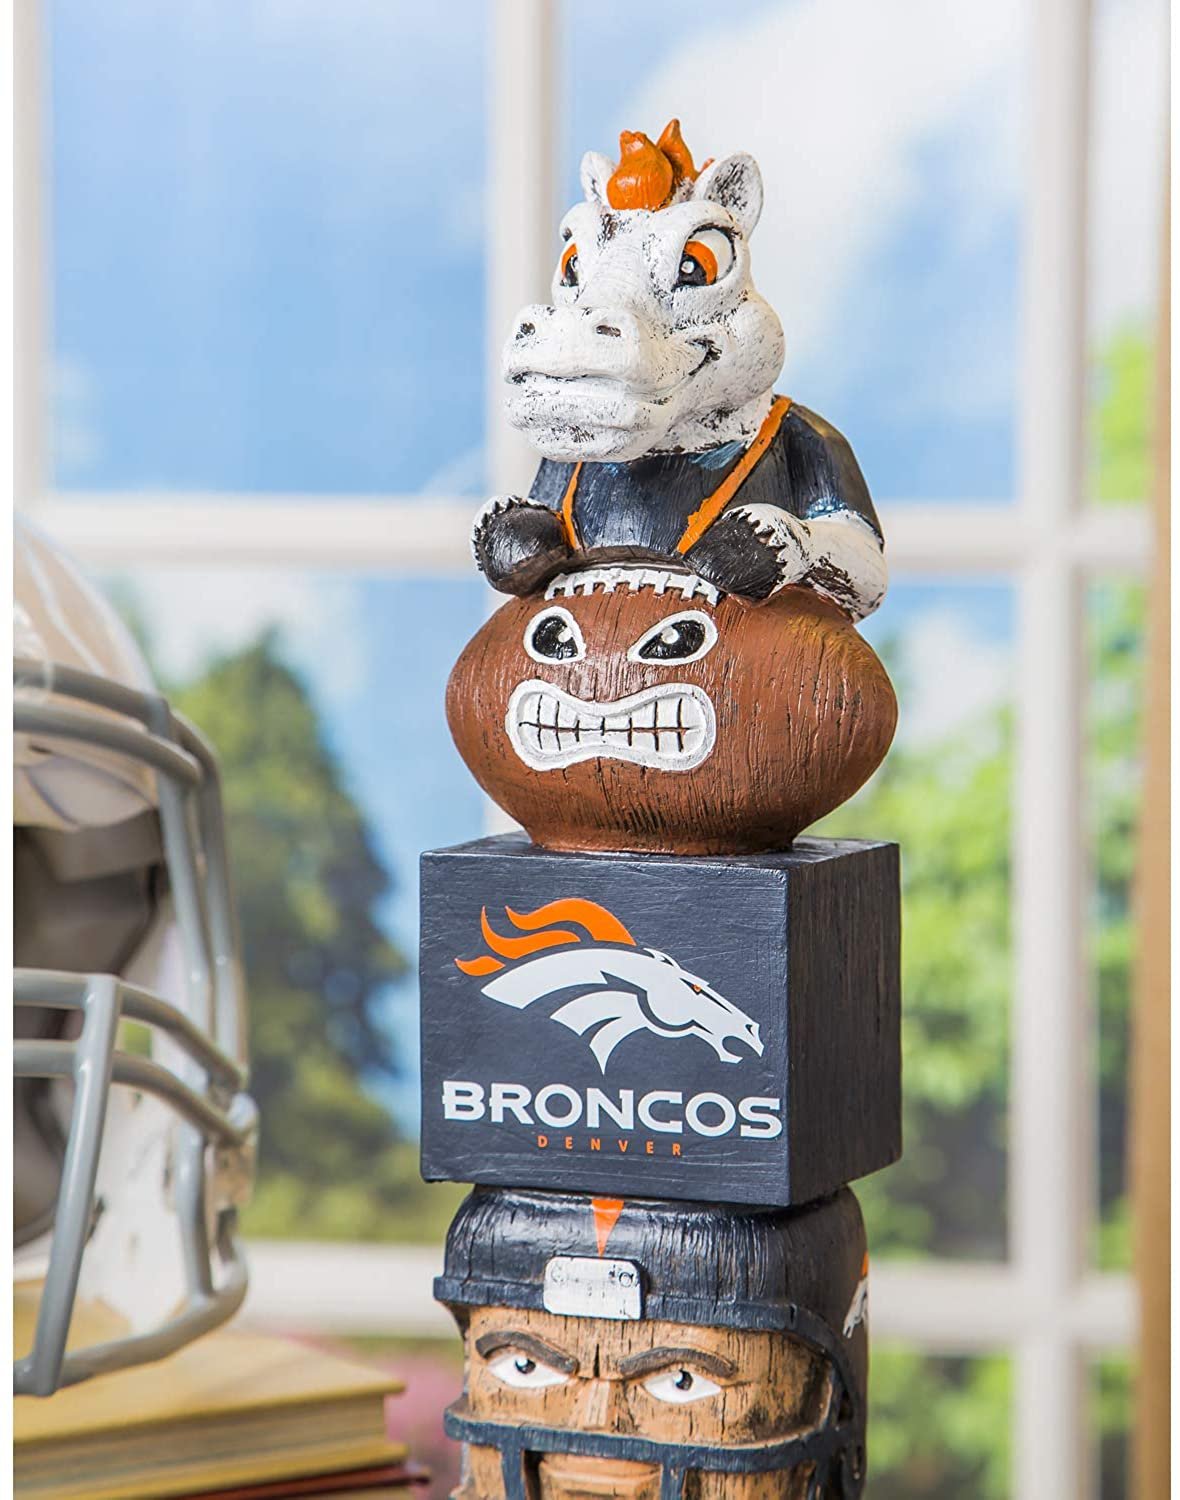 Denver Broncos Garden Statue, Tiki Totem Style, Outdoor or Indoor Use, 16 Inch Tall, Beautiful Hand Painted Resin Construction